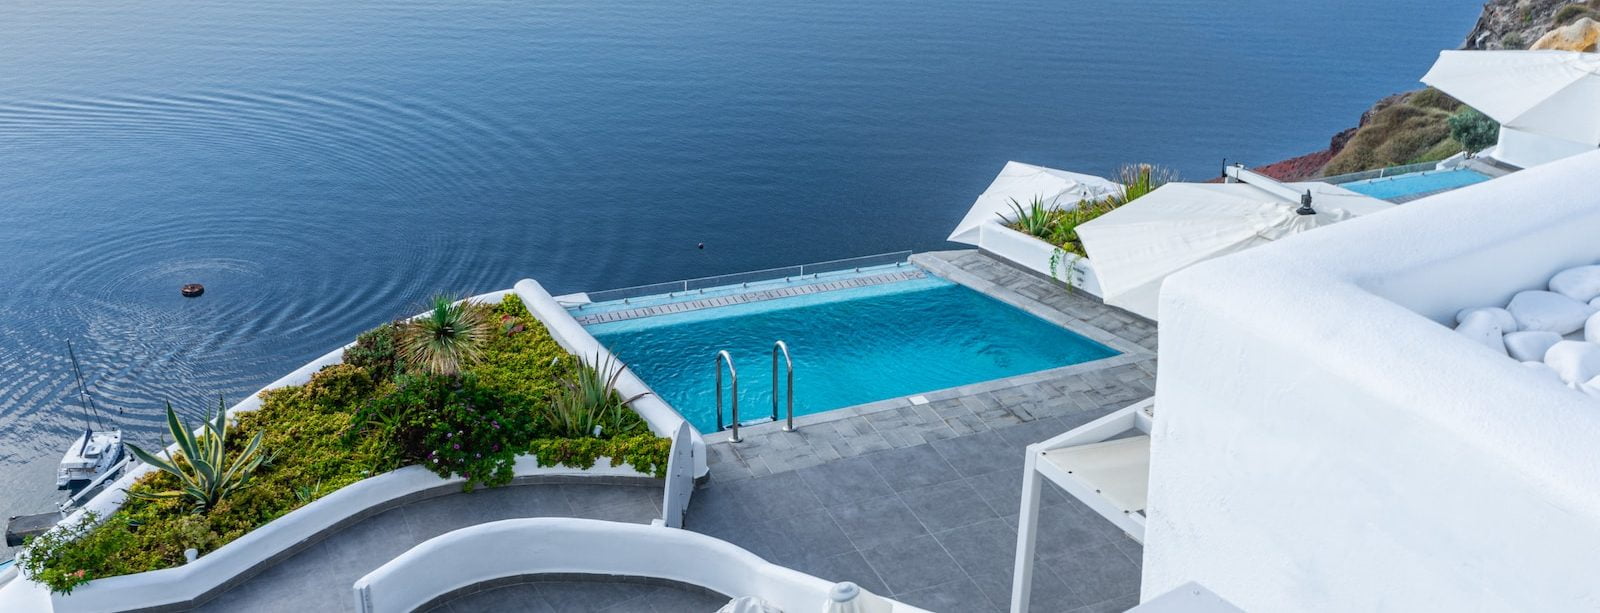 white concrete swimming pool near a body of water. Subscribe to our newsletter today